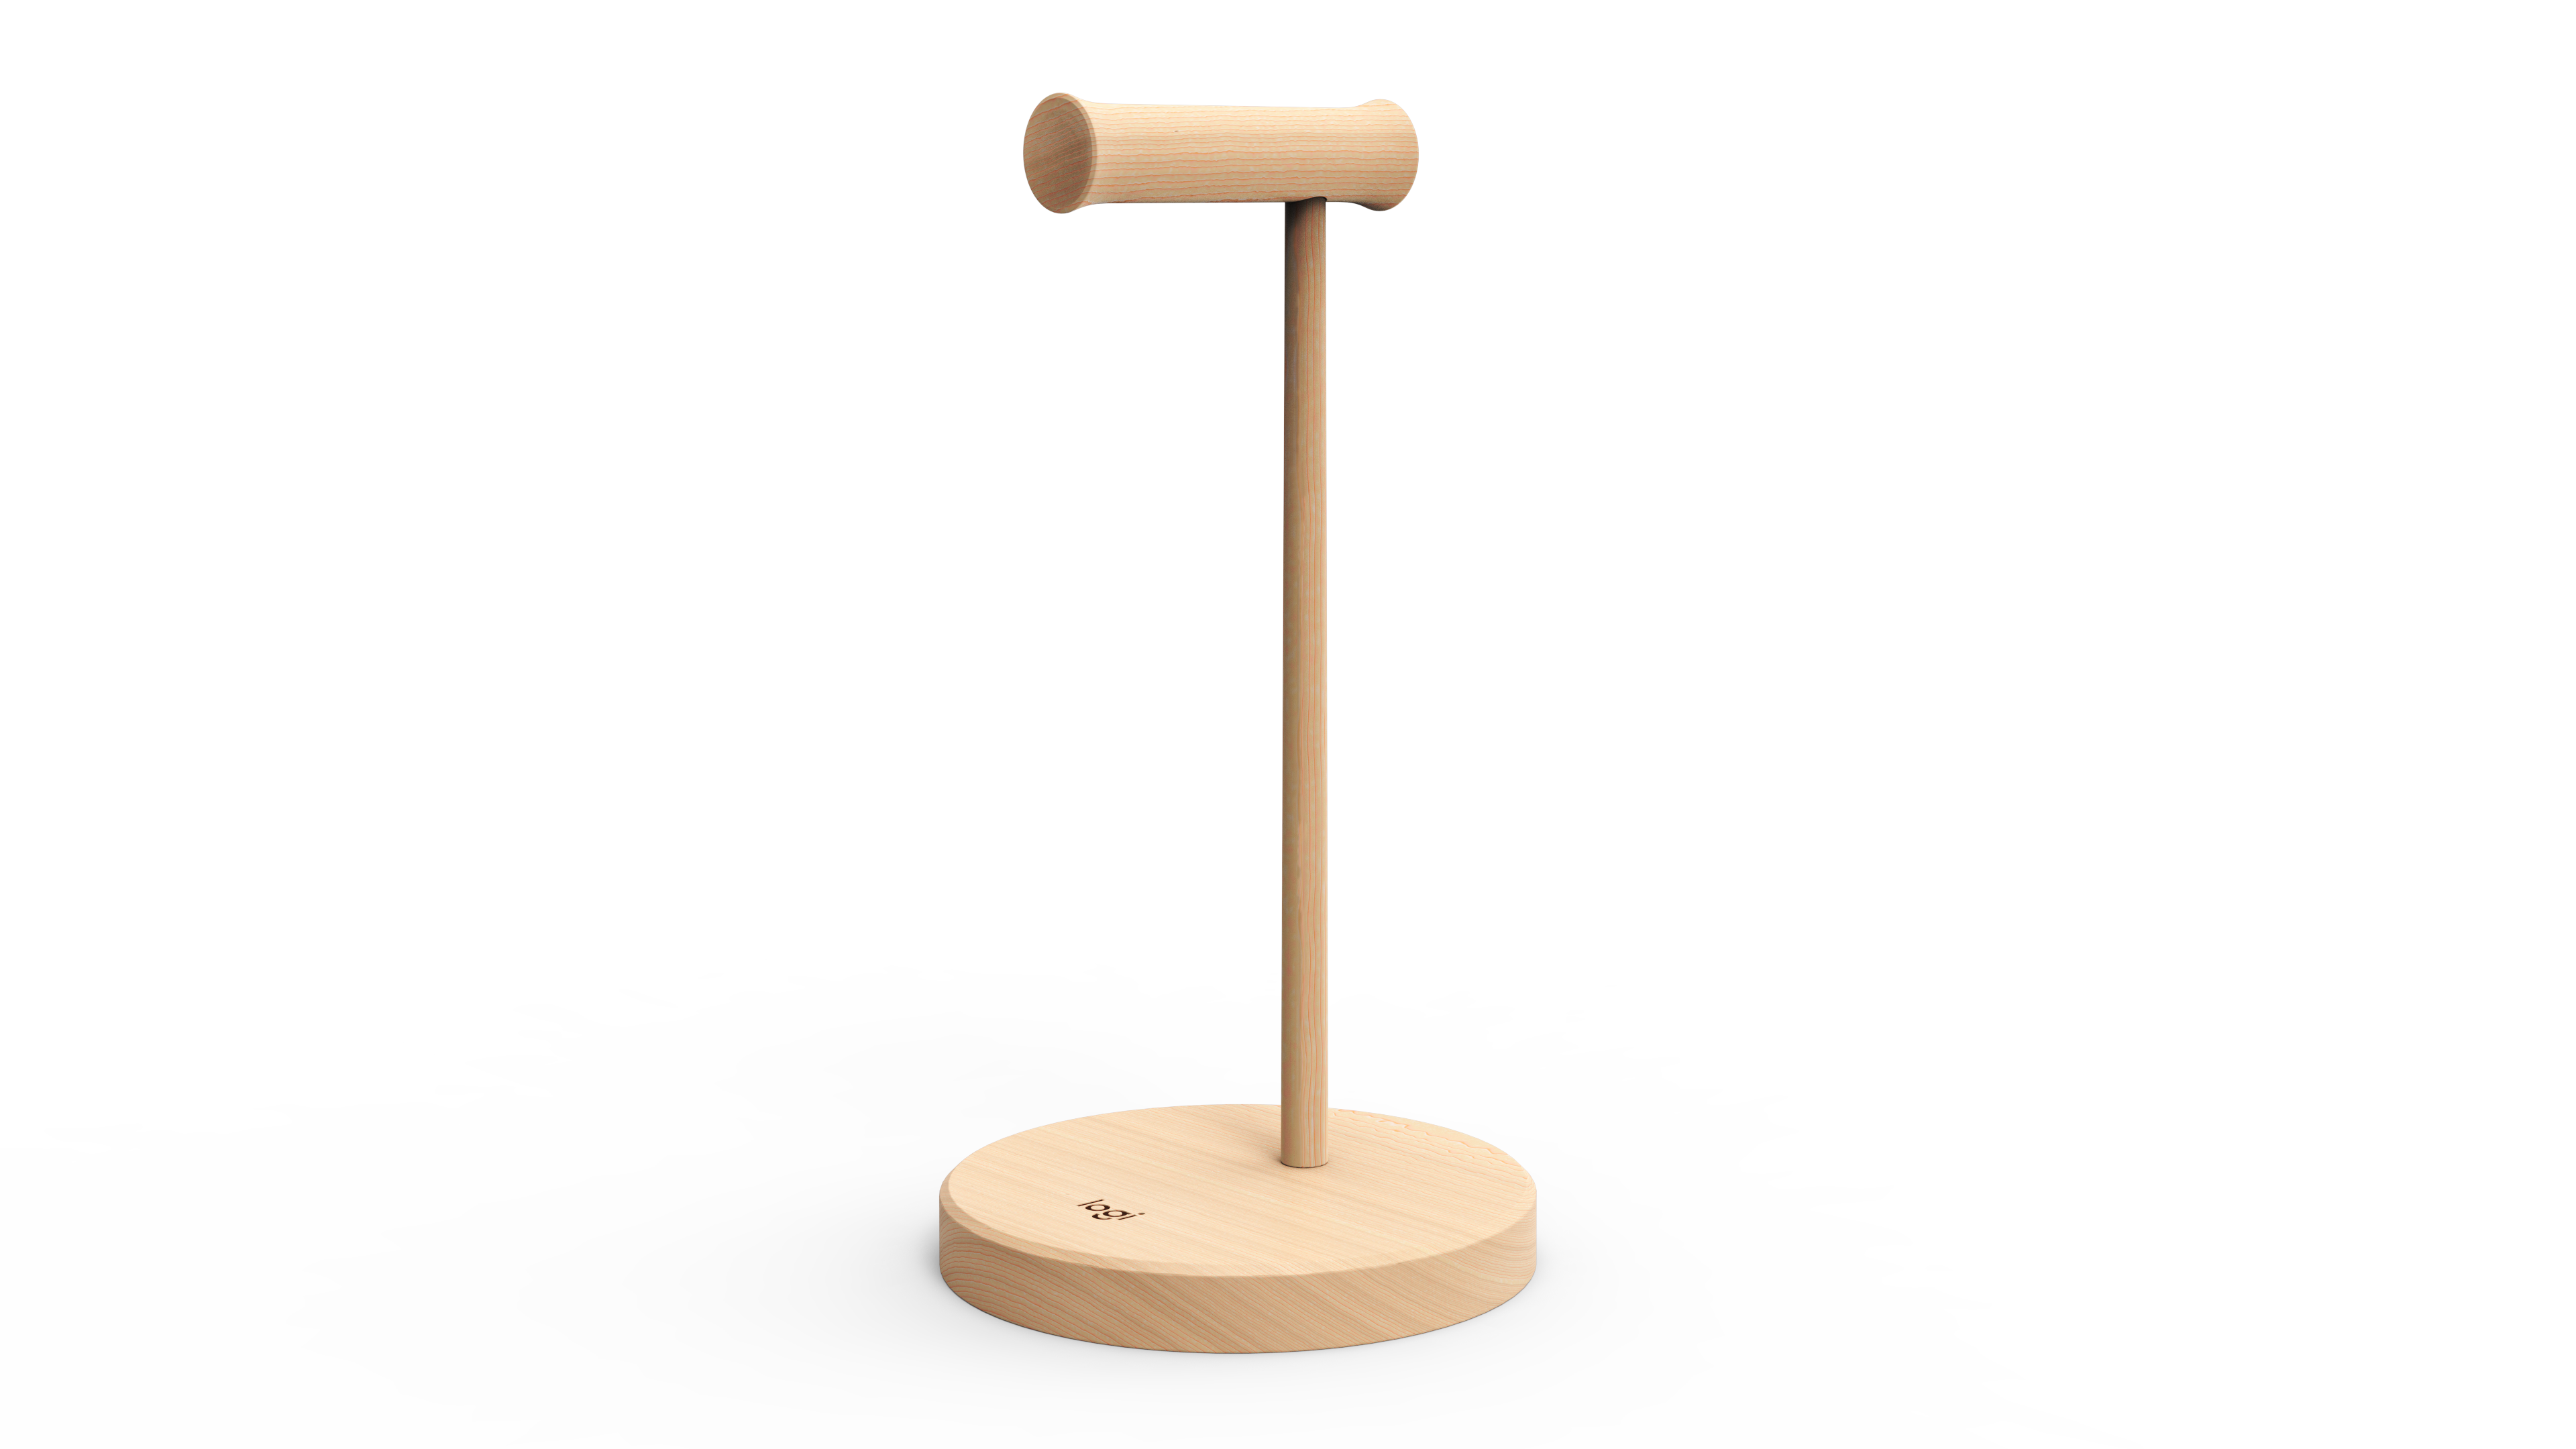 Image of Logi Wooden Headset Stand Stylish headphone stand made from FSC-certified beech wood. - Wood